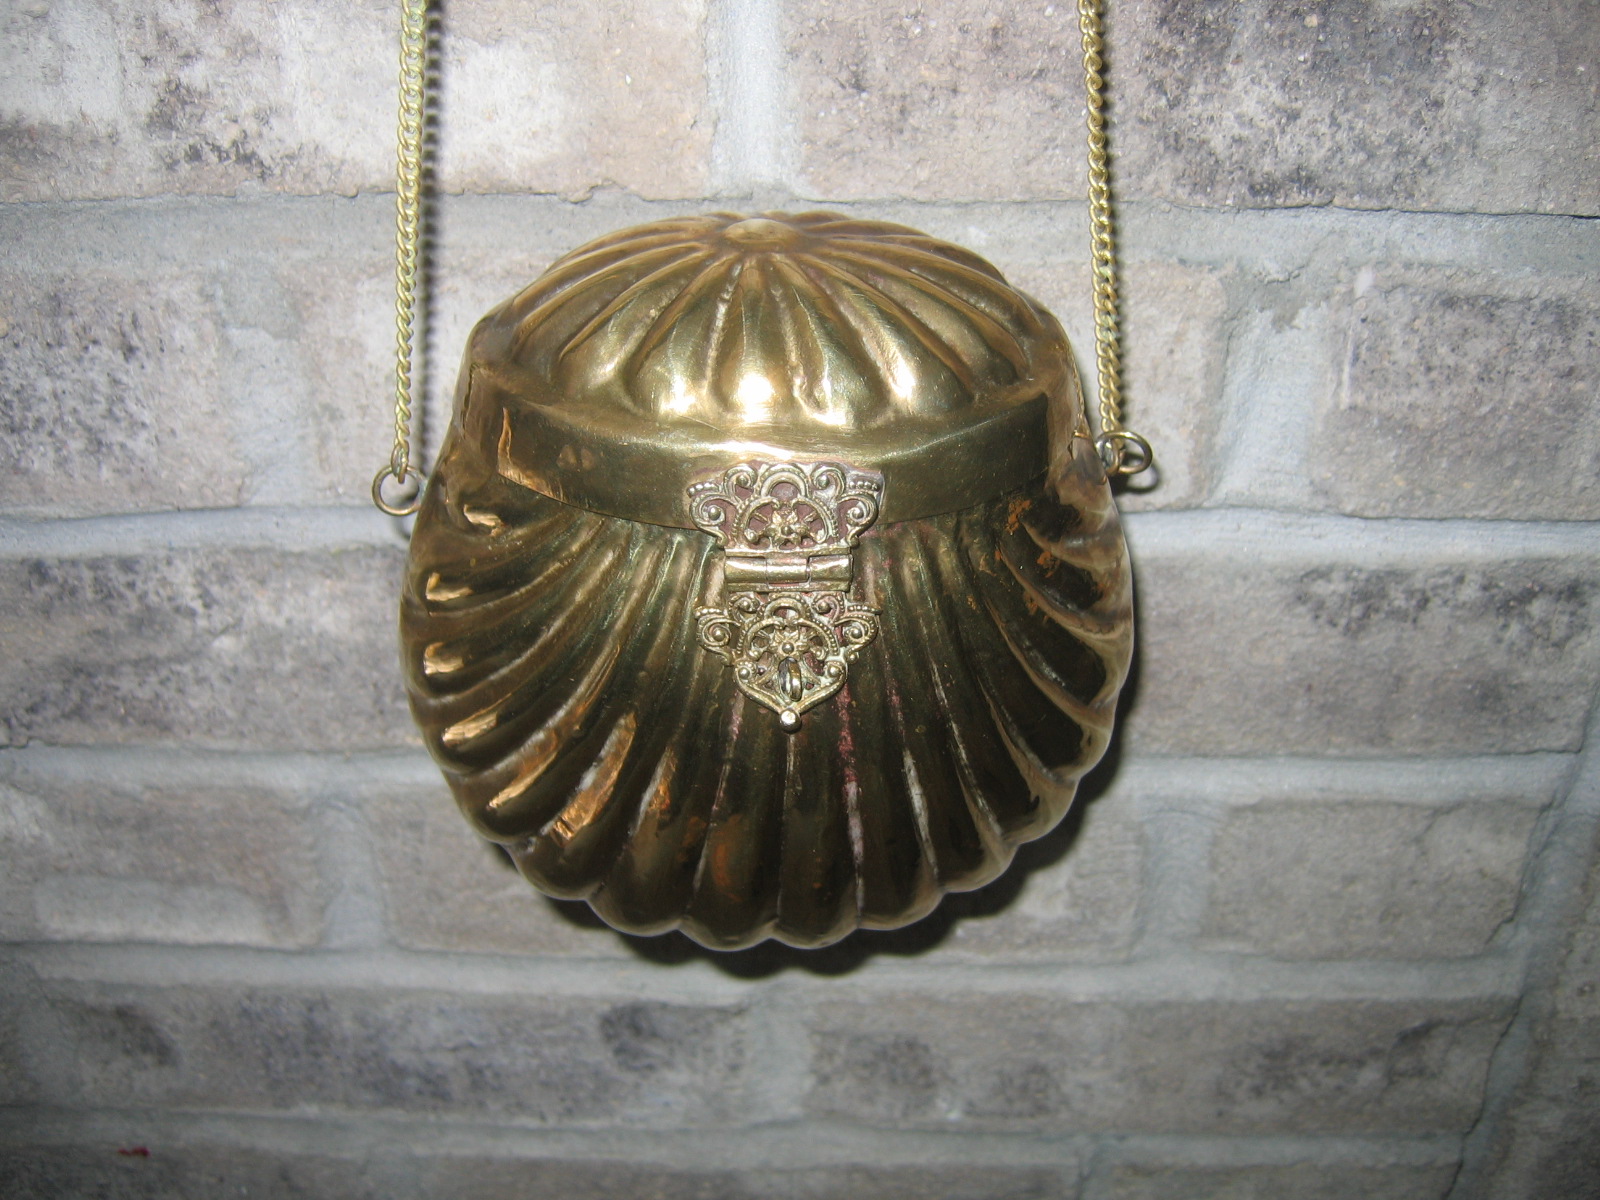 Antique Victorian Ladies Brass Clam Shell Purse Item #514 For Sale